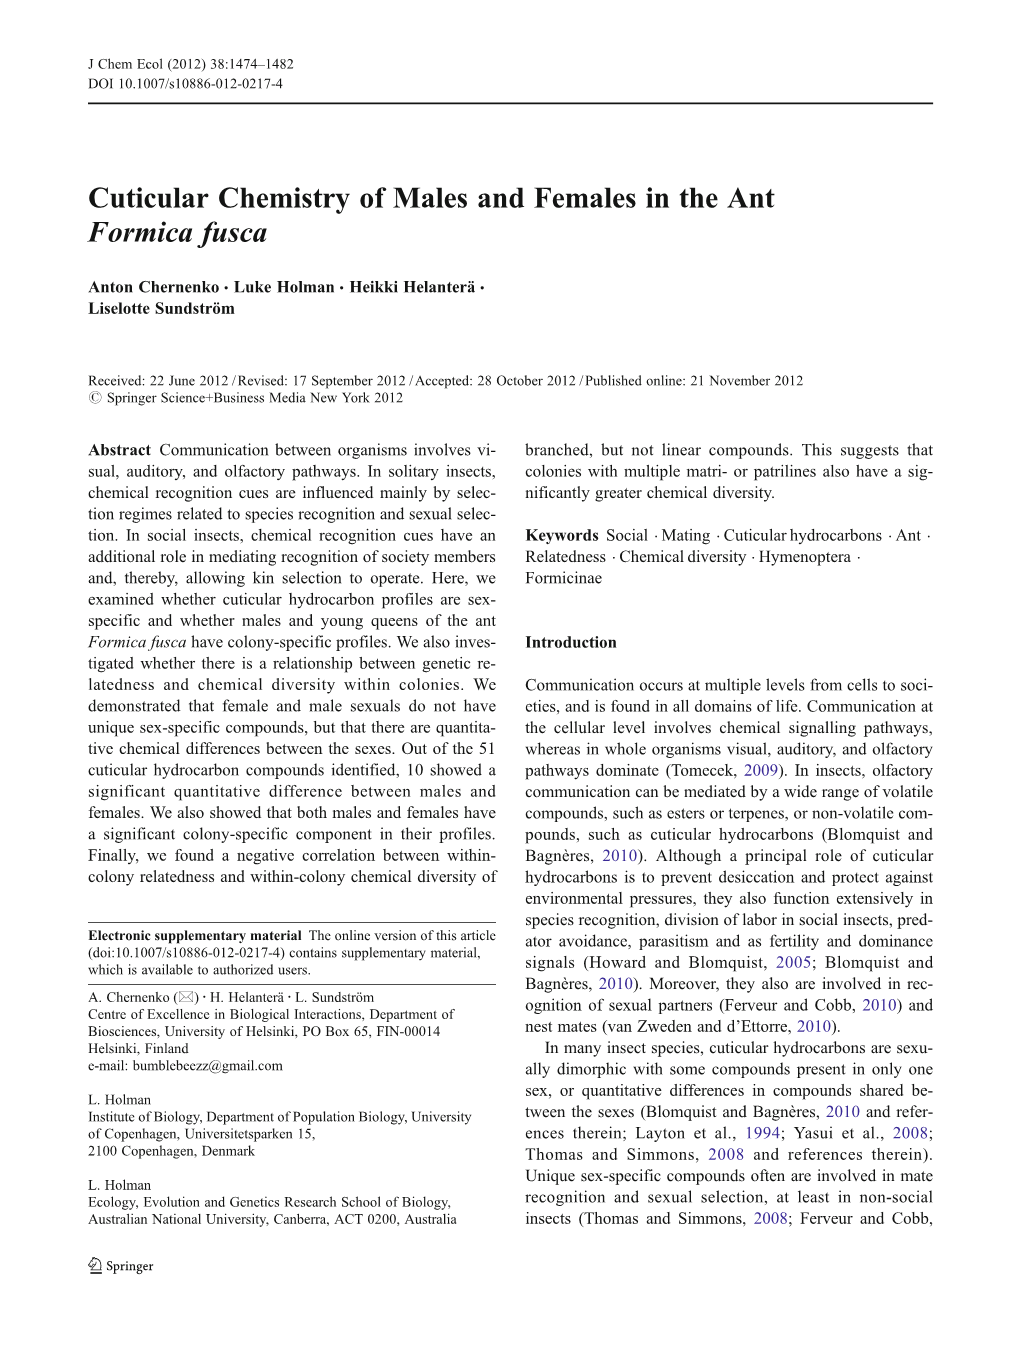 Cuticular Chemistry of Males and Females in the Ant Formica Fusca